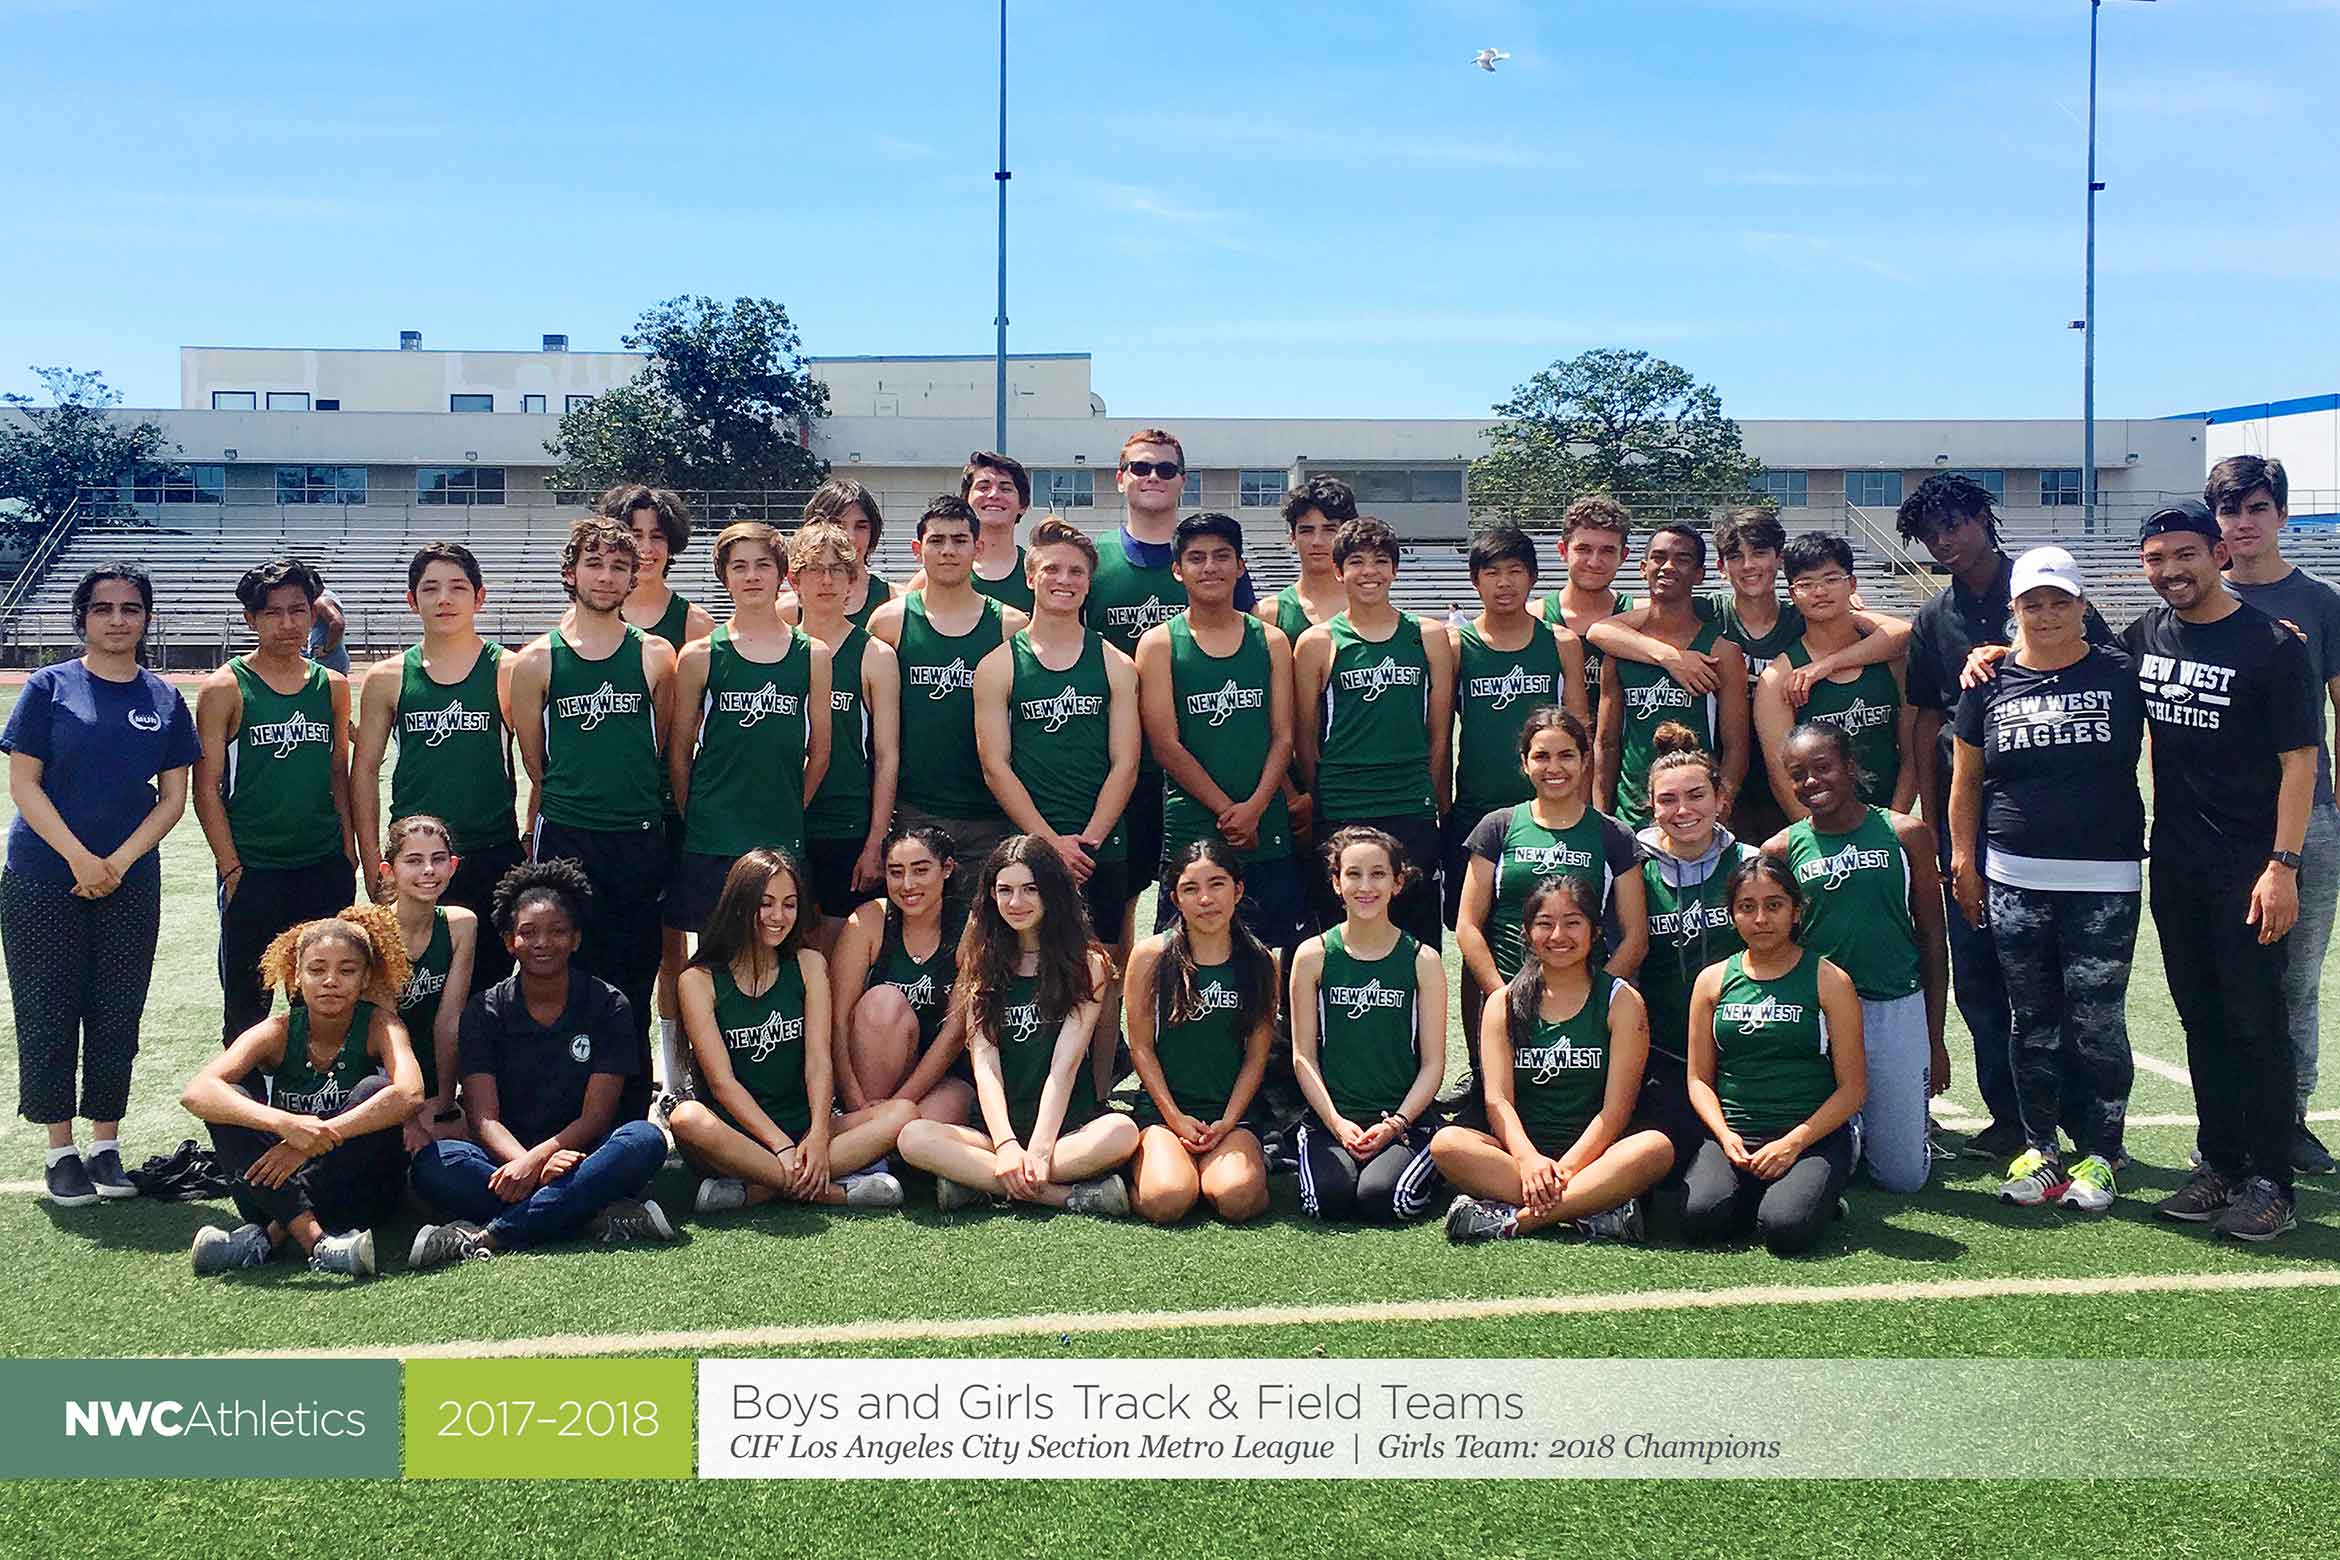 2017-2018 New West Charter Eagles Boys and Girls Track & Field Team